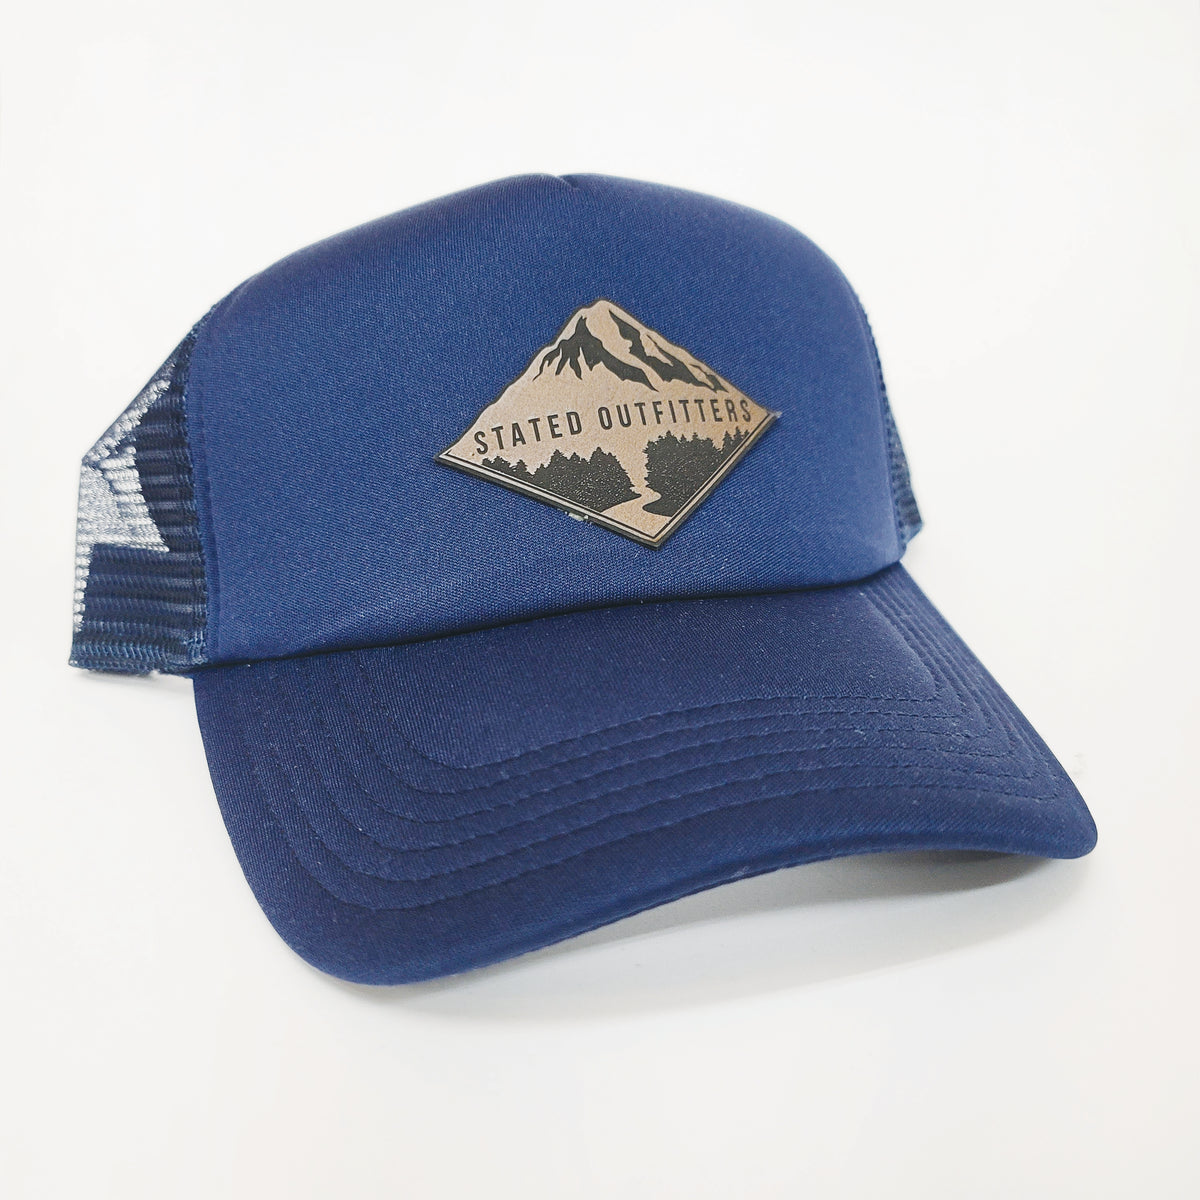 Stated Outfitters Patch Navy Foam Hat